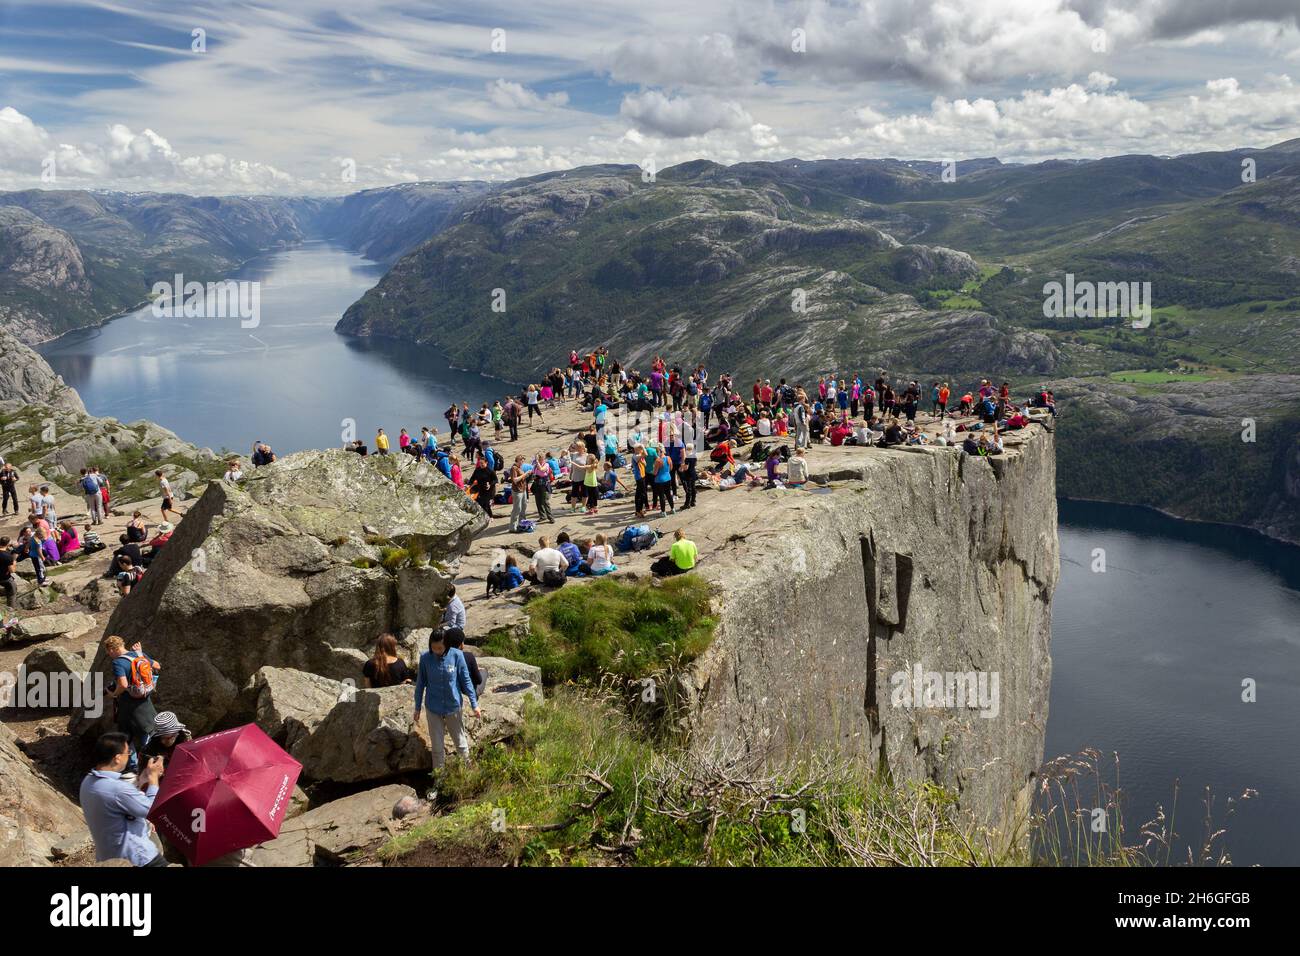 Rogaland, Norway: Preikestolen (Pulpit Rock), 604 m above Lysefjord. Famous tourist attraction and viewpoint. Stock Photo